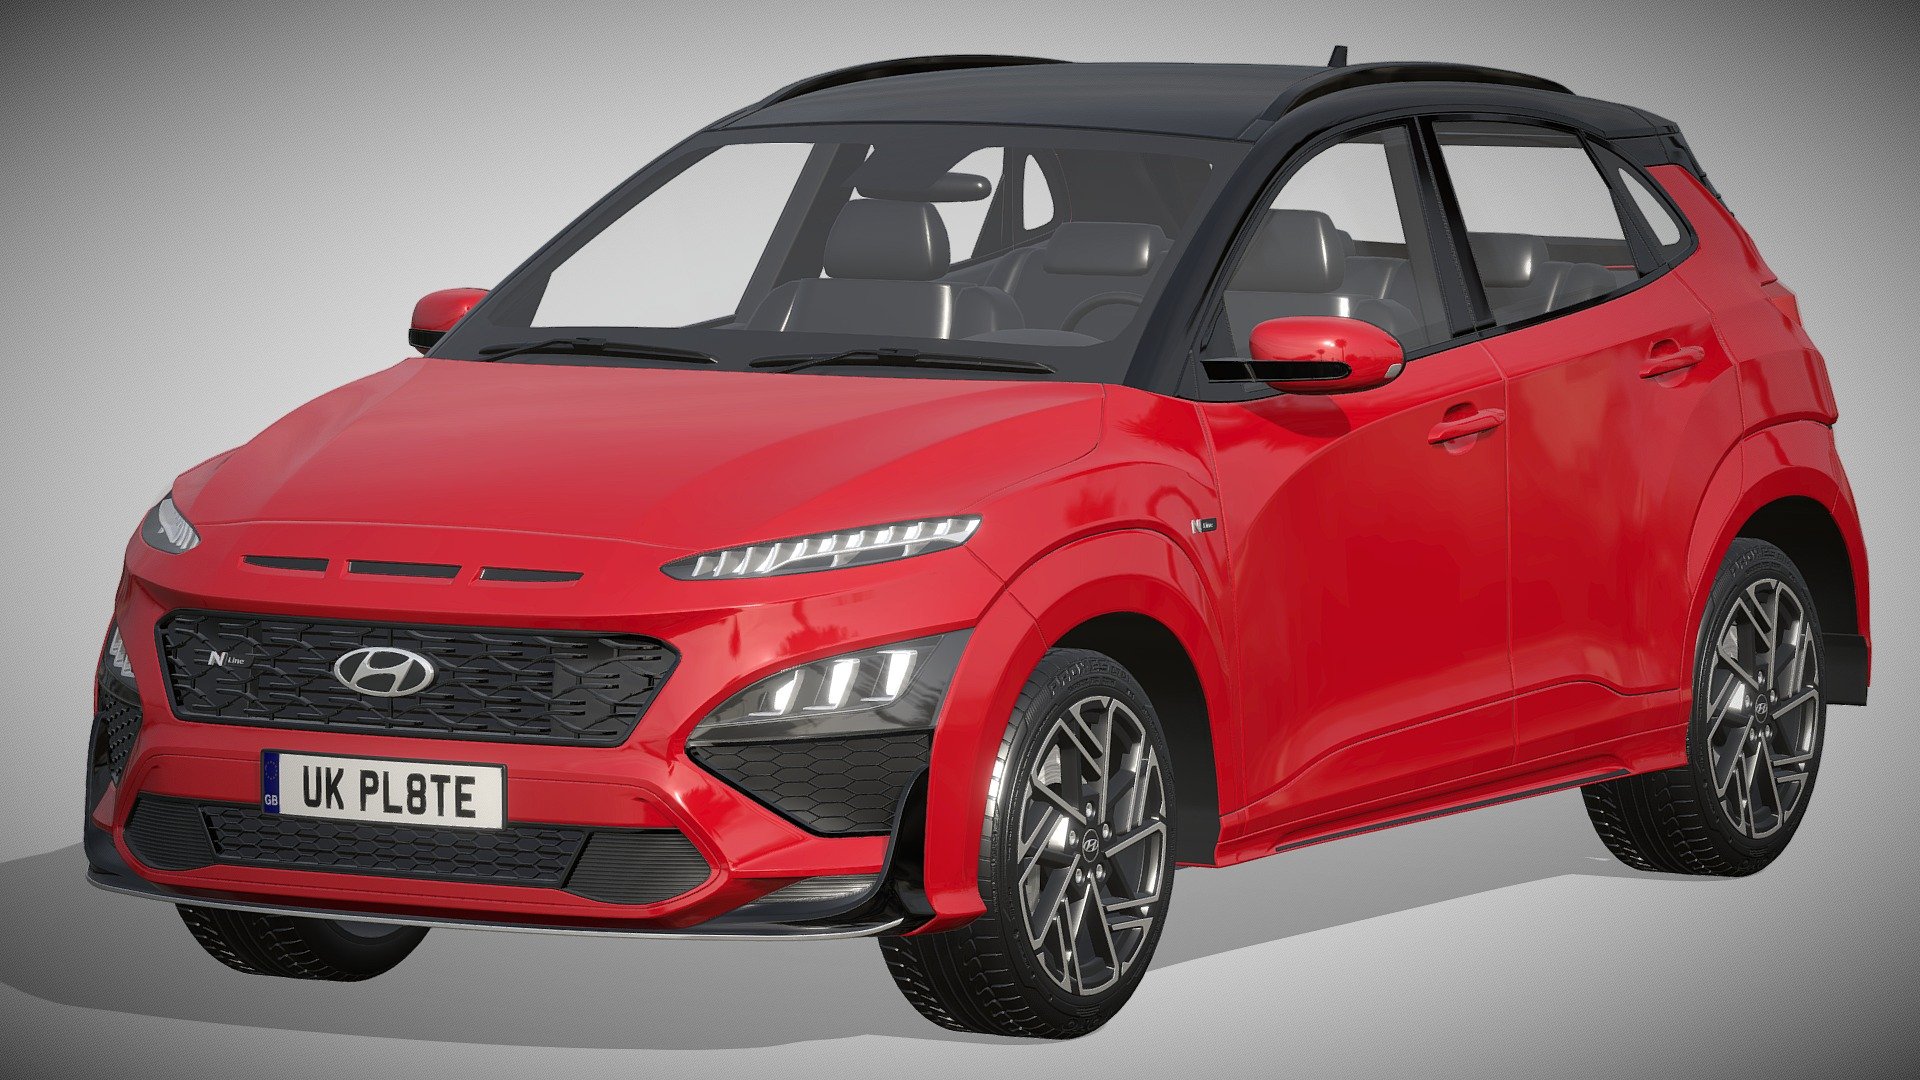 Hyundai Kona N-Line 2022

https://www.hyundaiusa.com/us/en/vehicles/kona/n-line

Clean geometry Light weight model, yet completely detailed for HI-Res renders. Use for movies, Advertisements or games

Corona render and materials

All textures include in *.rar files

Lighting setup is not included in the file! - Hyundai Kona N-Line 2022 - Buy Royalty Free 3D model by zifir3d 3d model